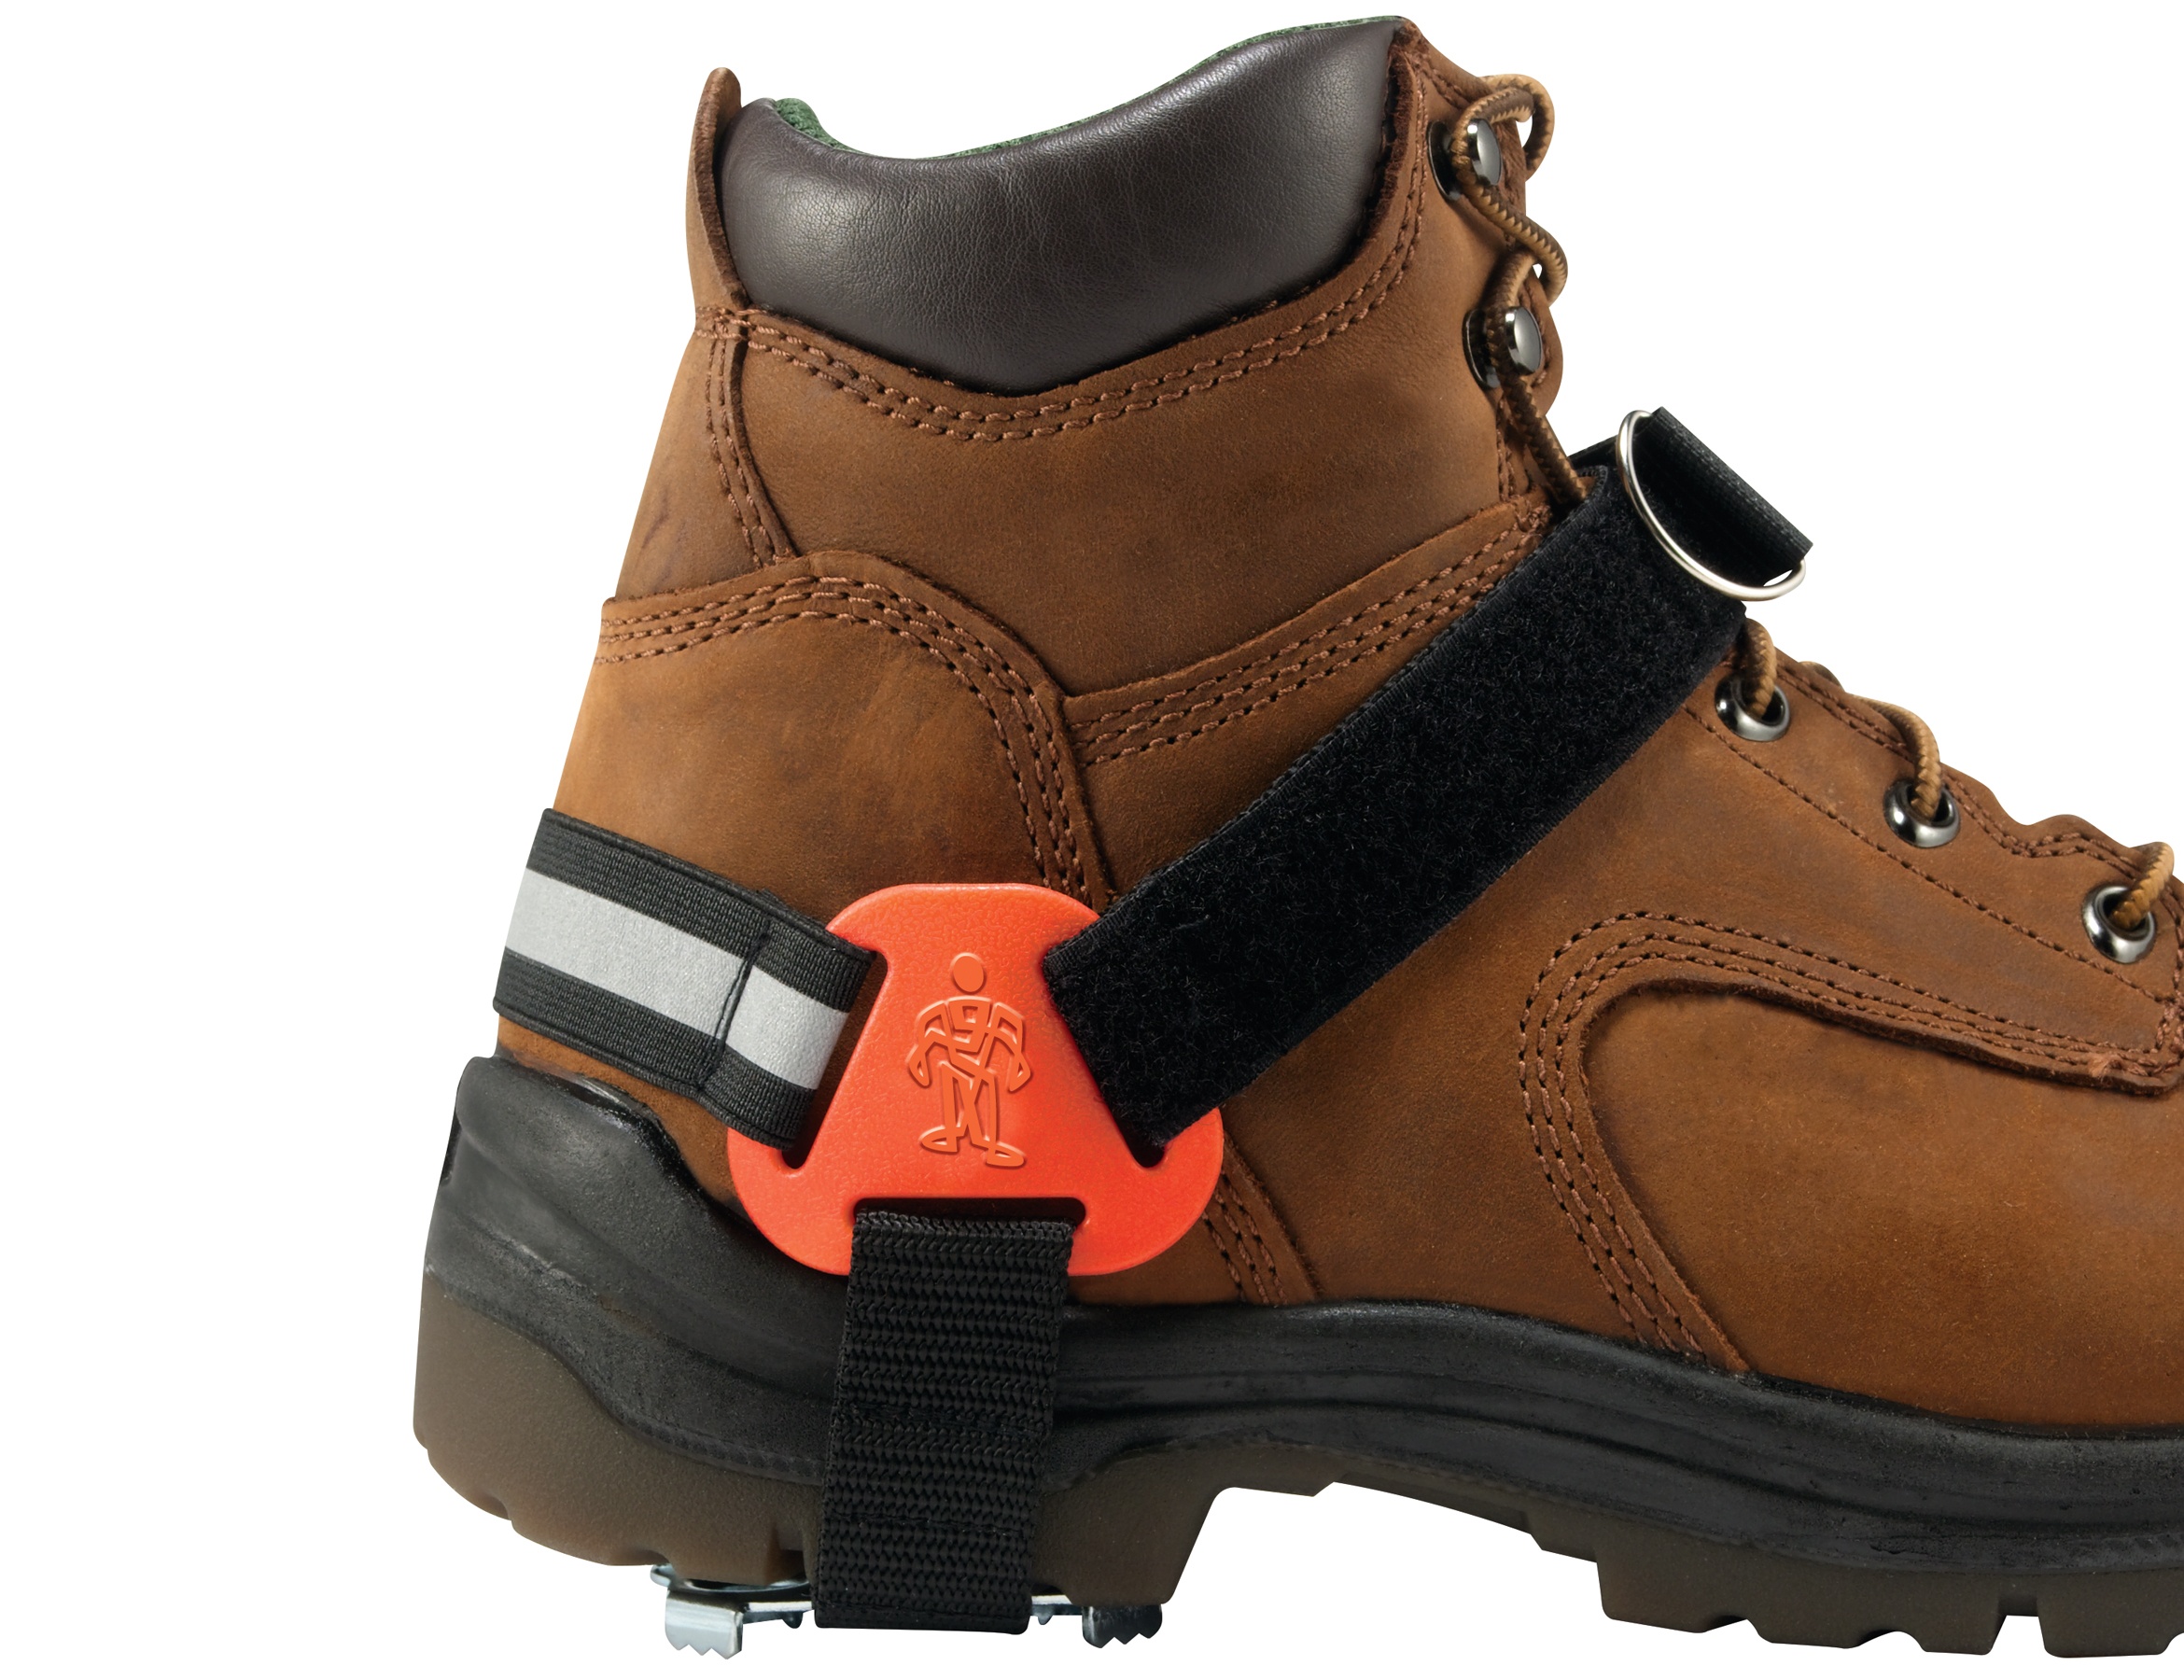 Ergodyne 6315 Trex Strap-On Heel Ice Traction Device from Columbia Safety